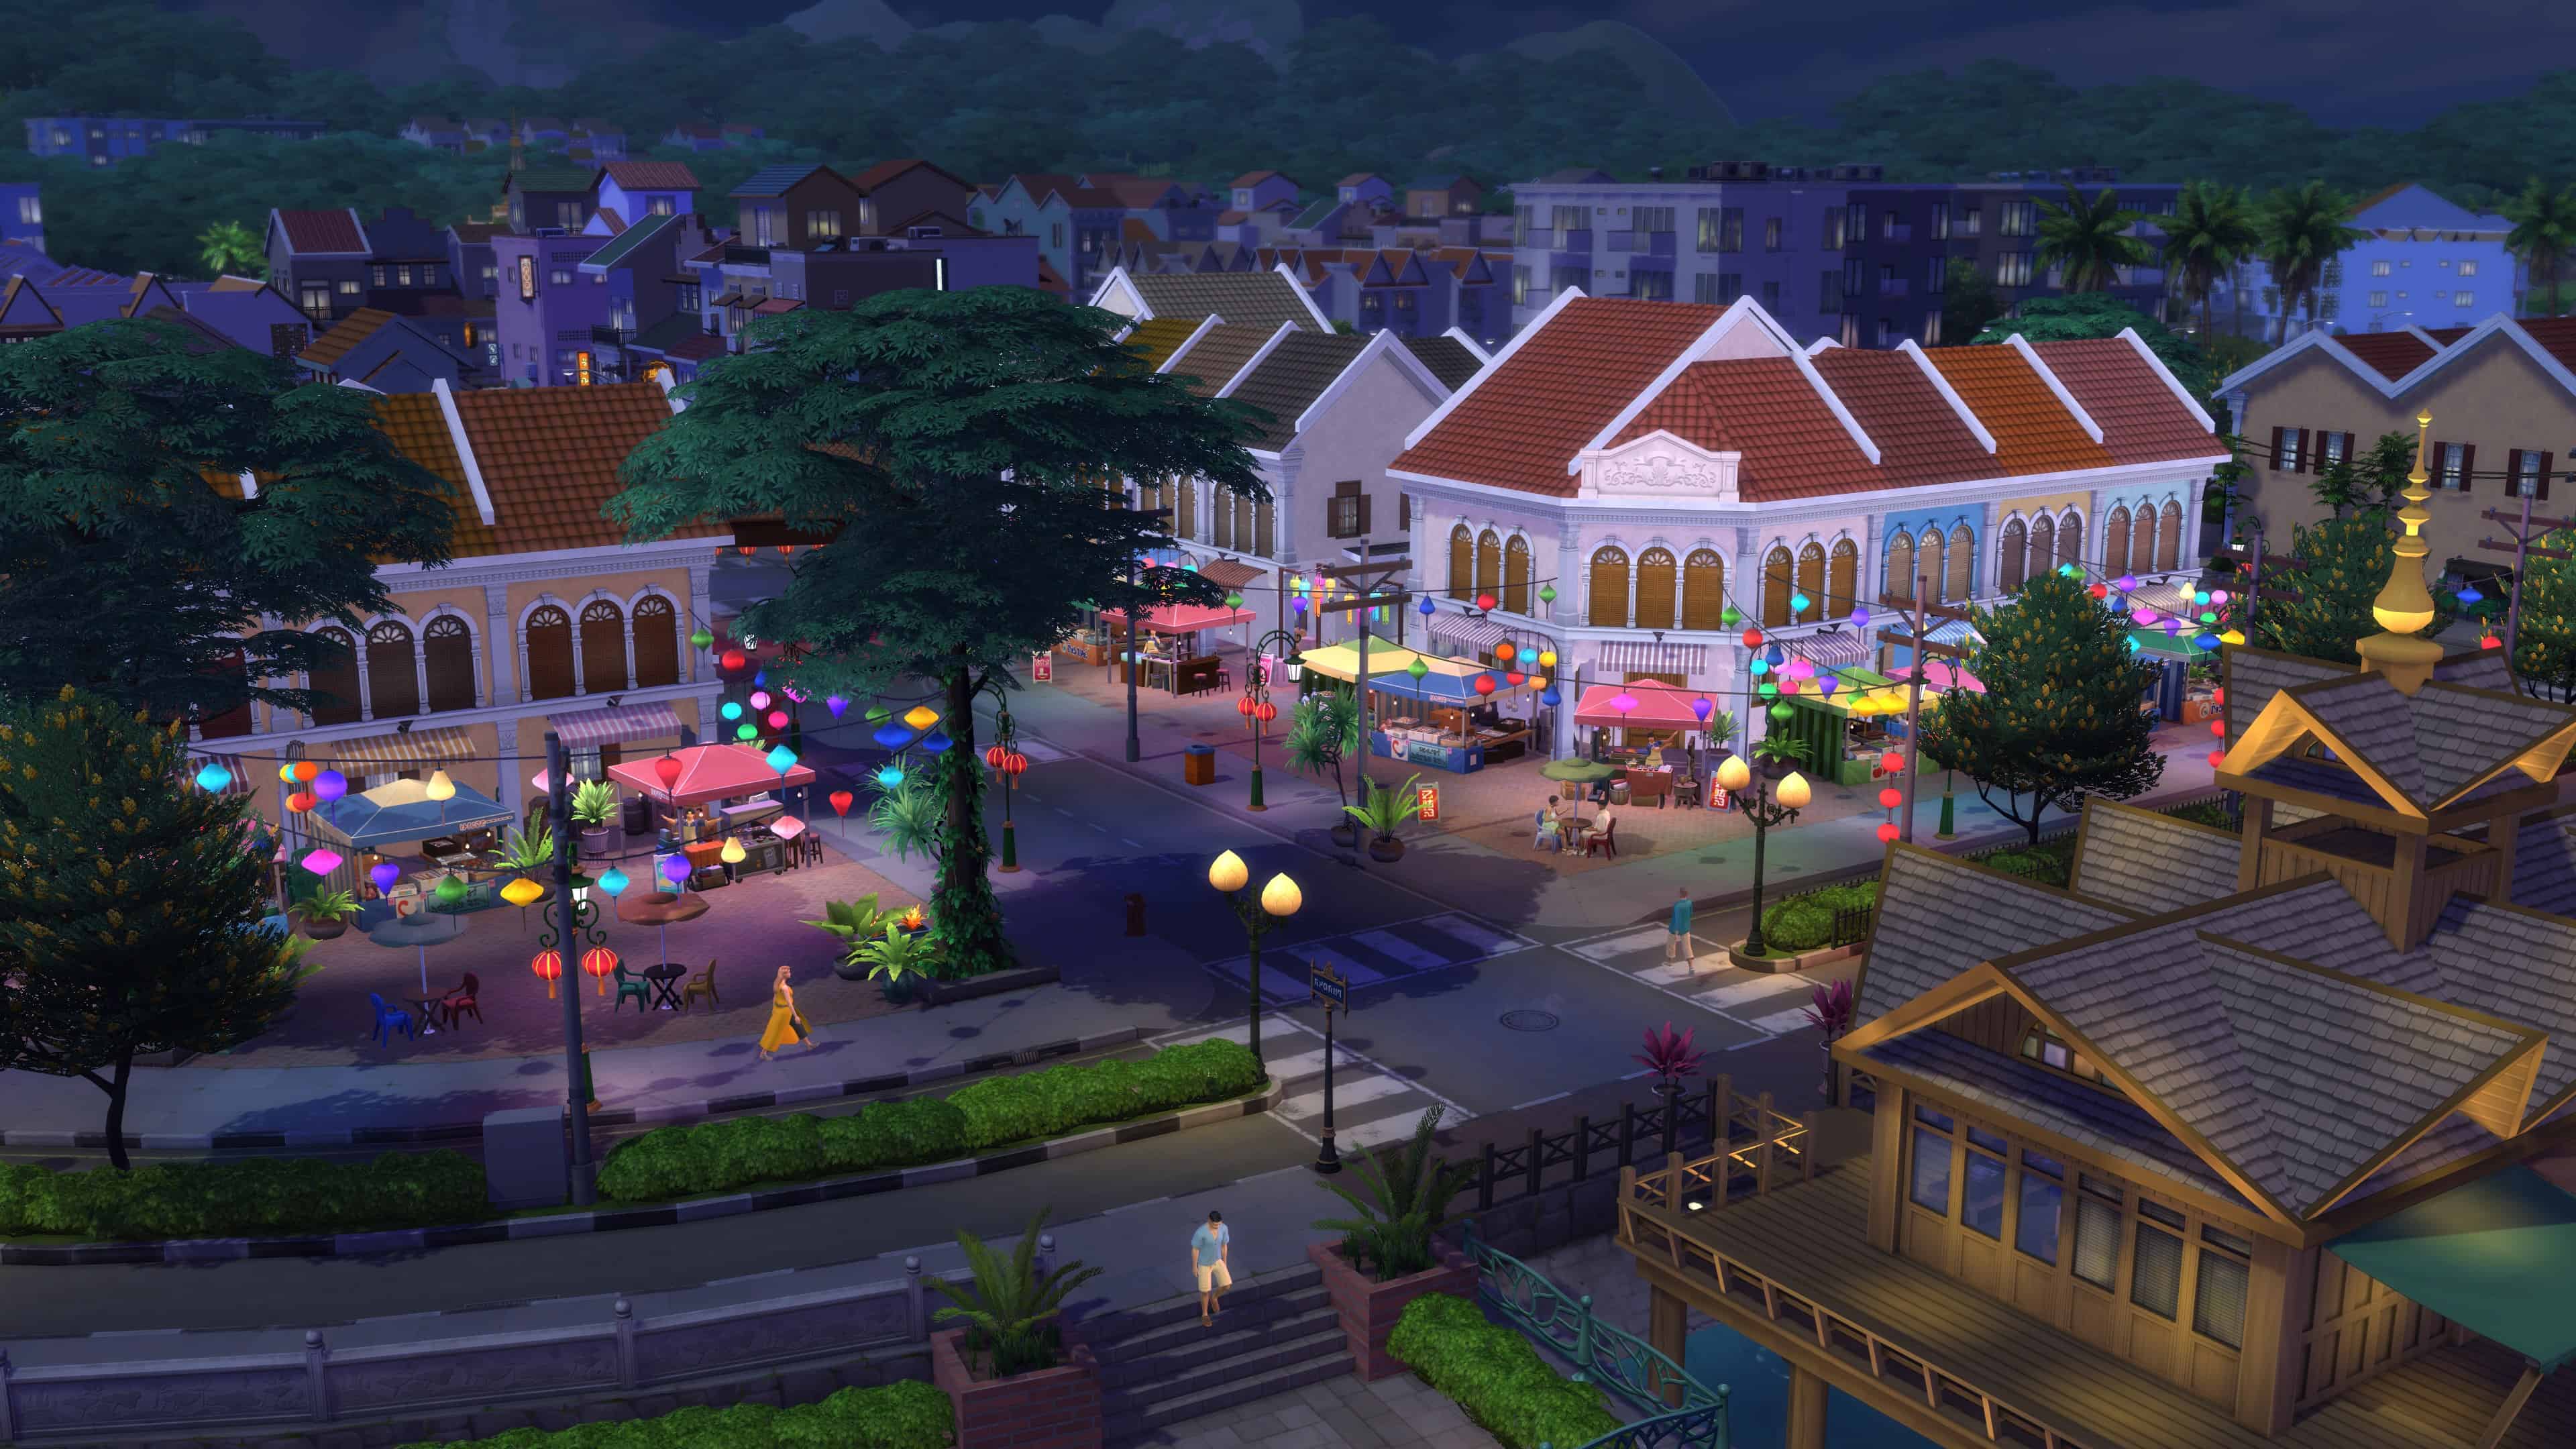 The Sims 4 For Rent image of the town